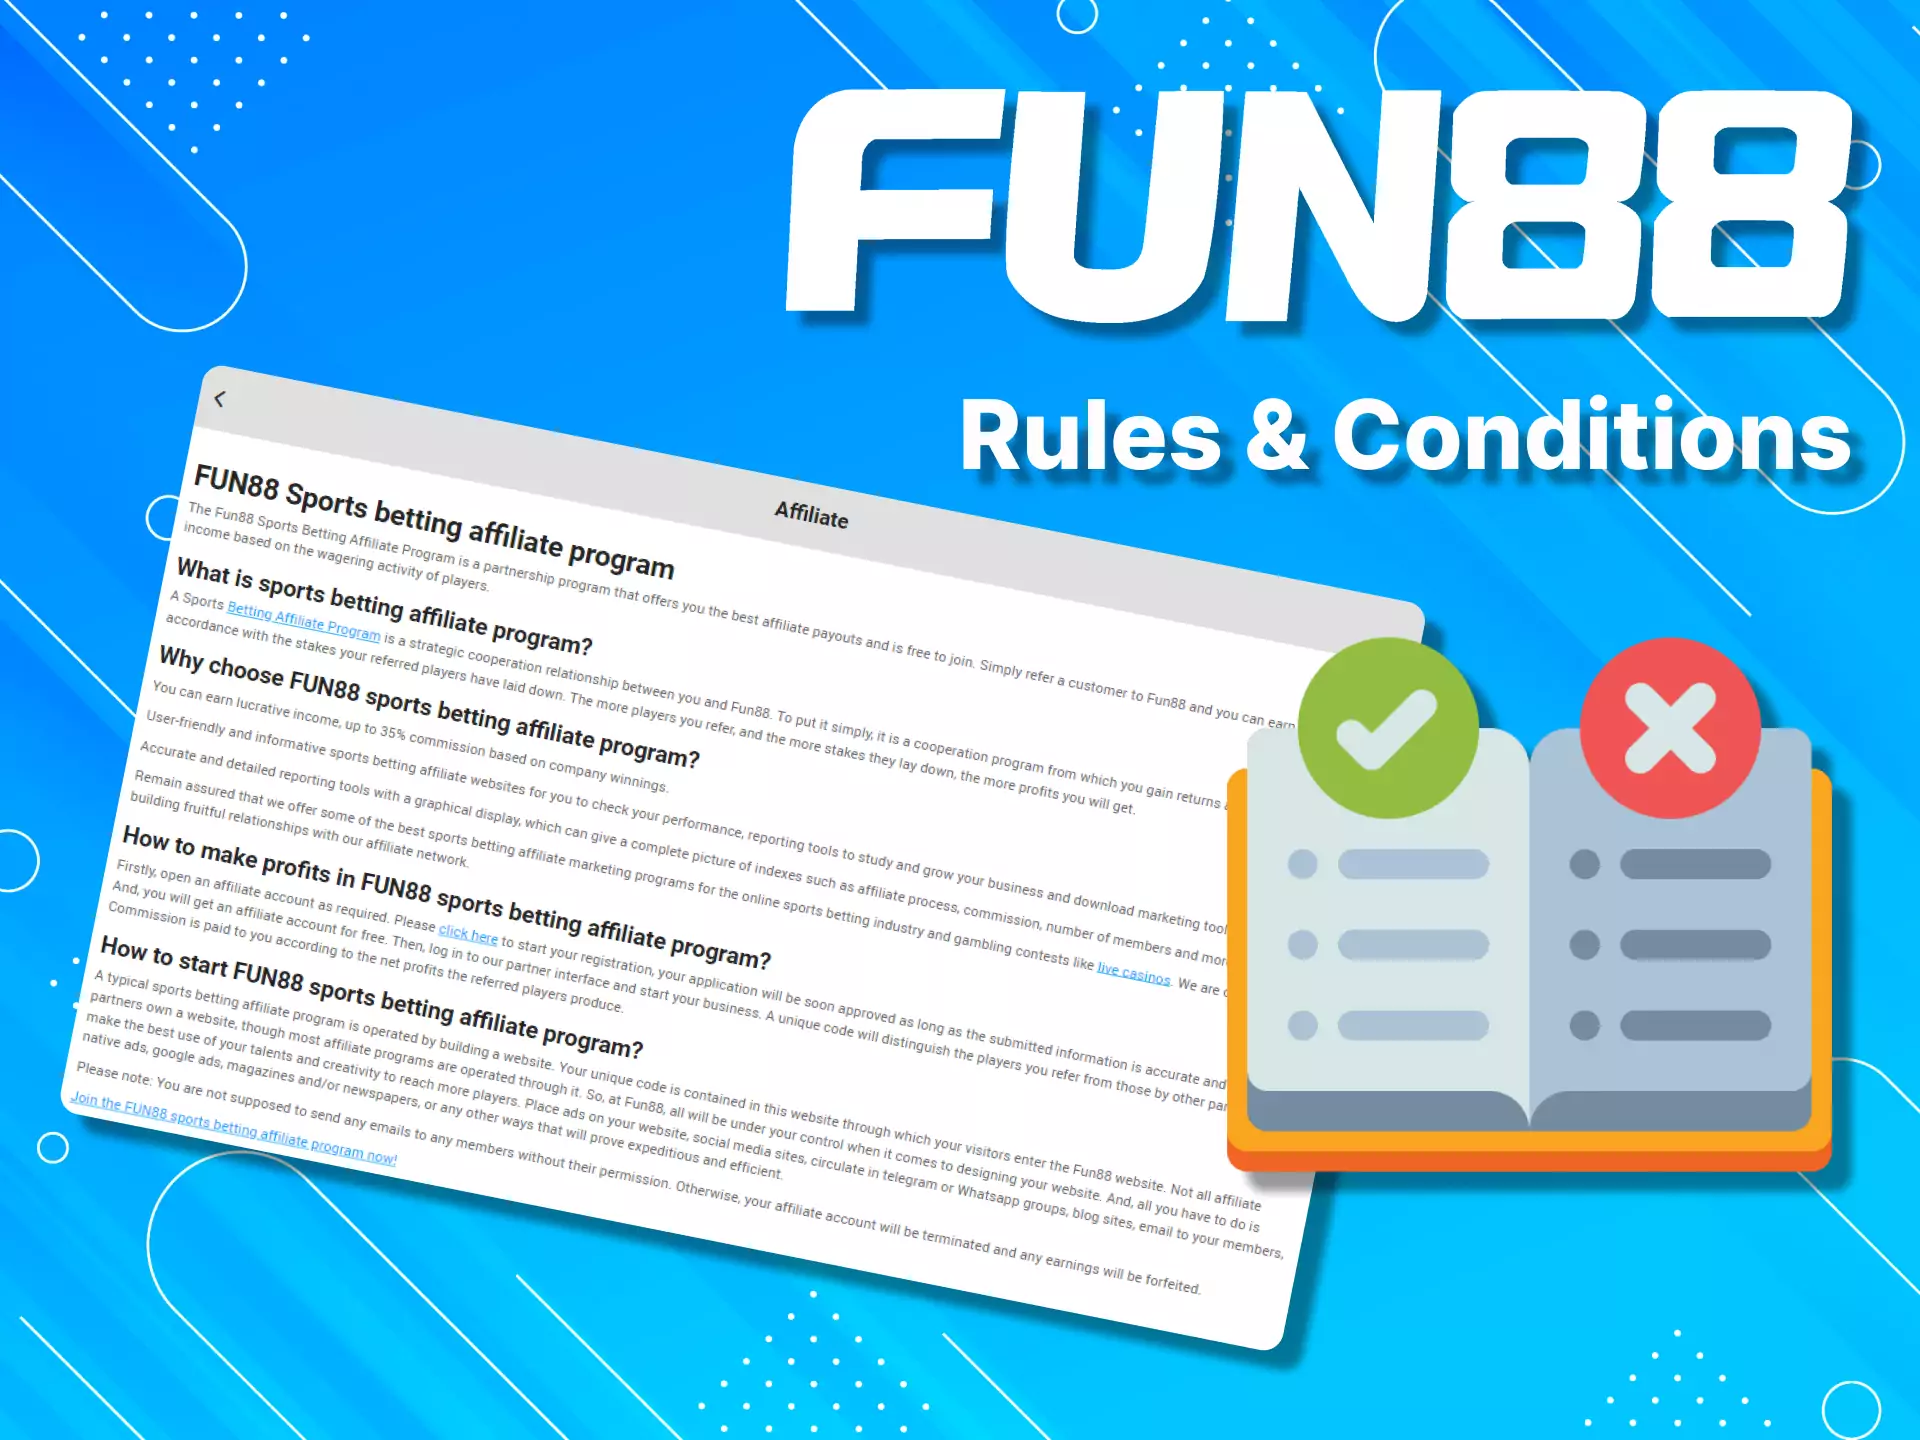 Read the rules and conditions of the Fun88 affiliate program.